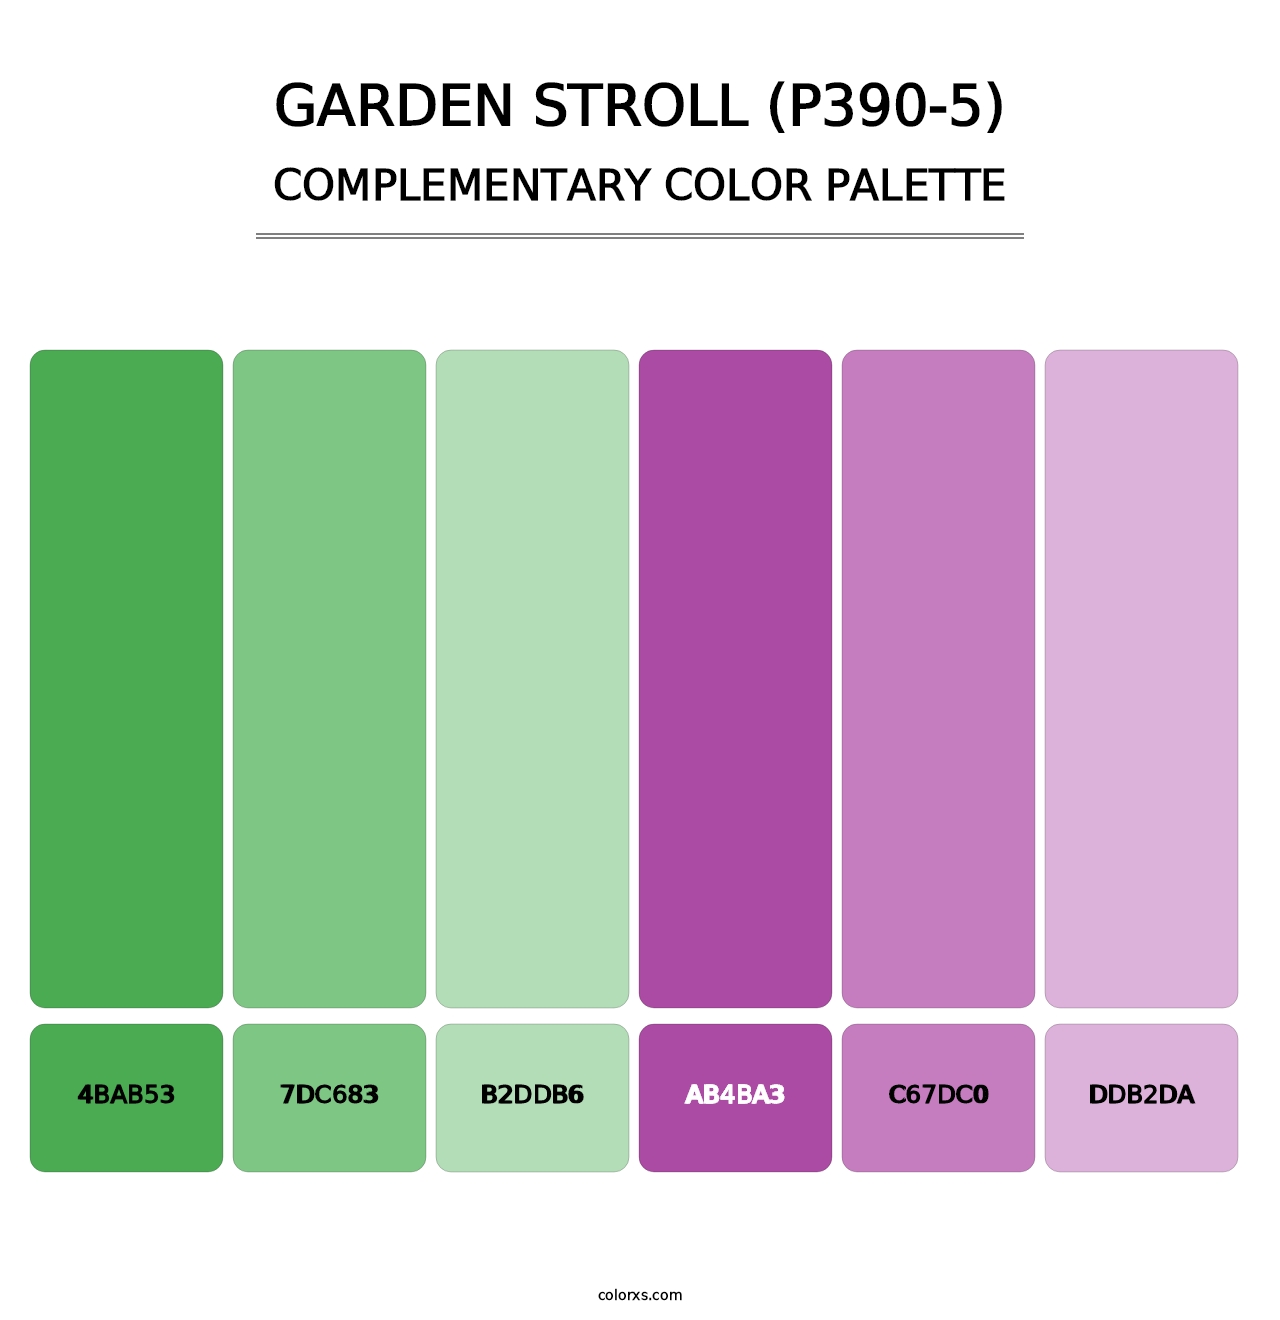 Garden Stroll (P390-5) - Complementary Color Palette